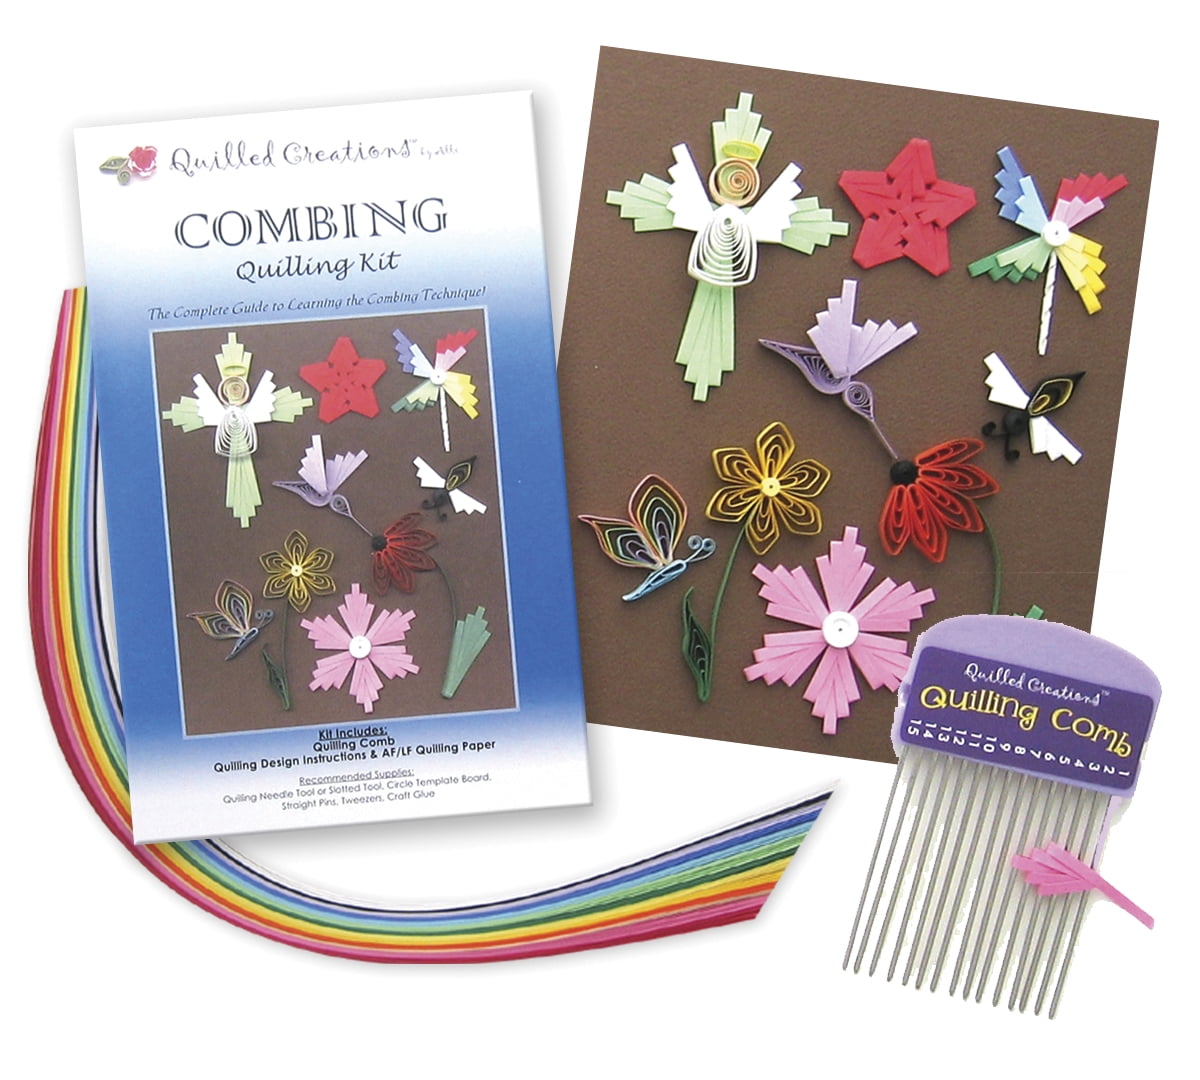 Paper Quilling Comb Patterns - How to Make Quilled Designs